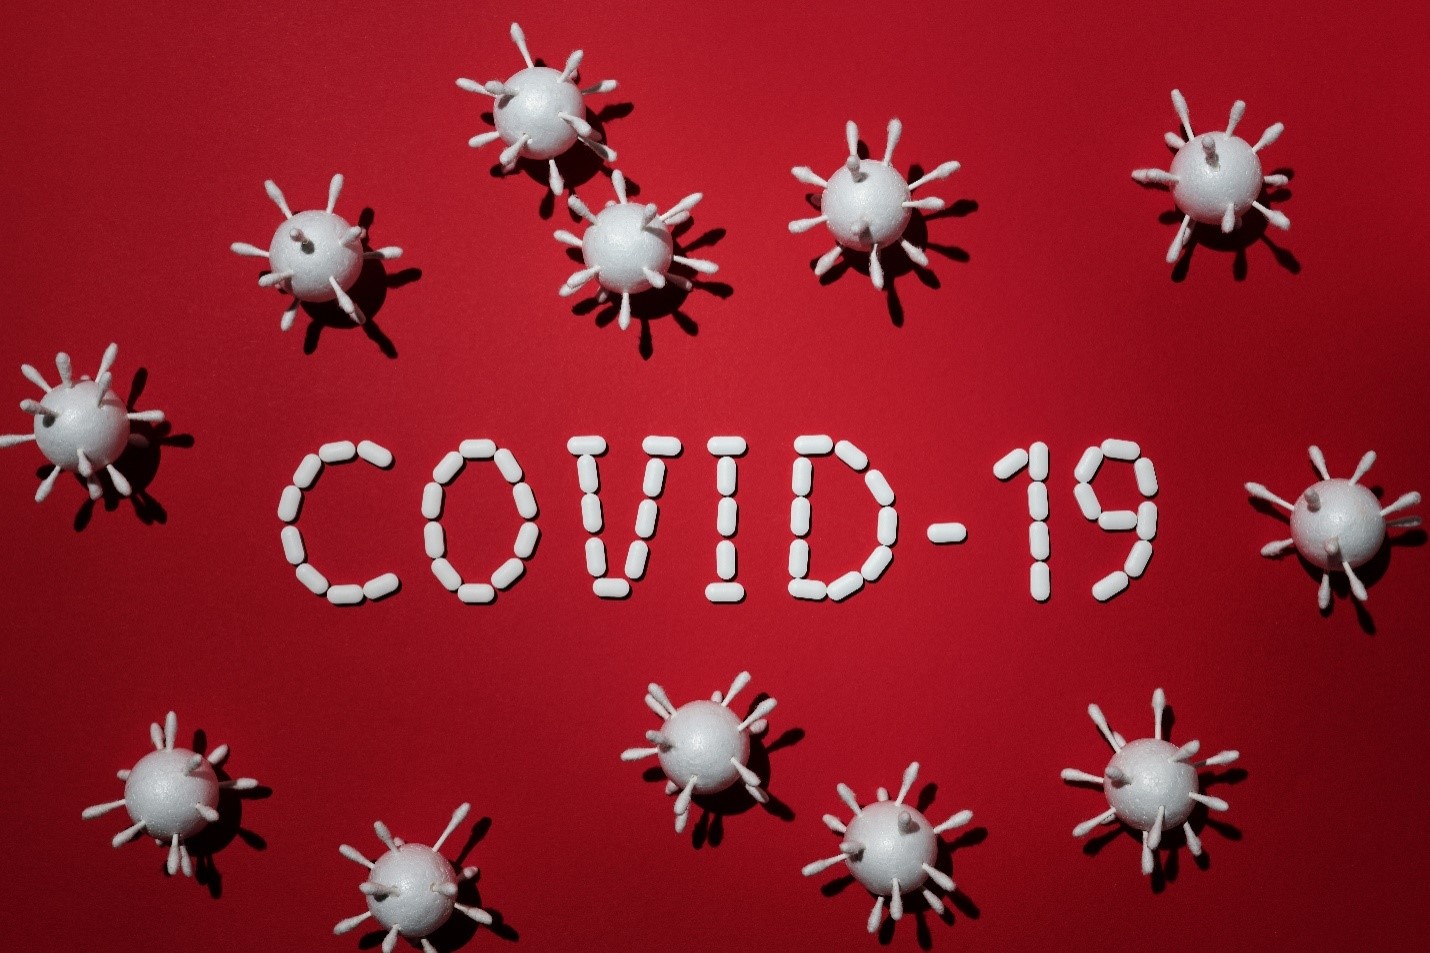 covid-19 graphic surrounded by virus